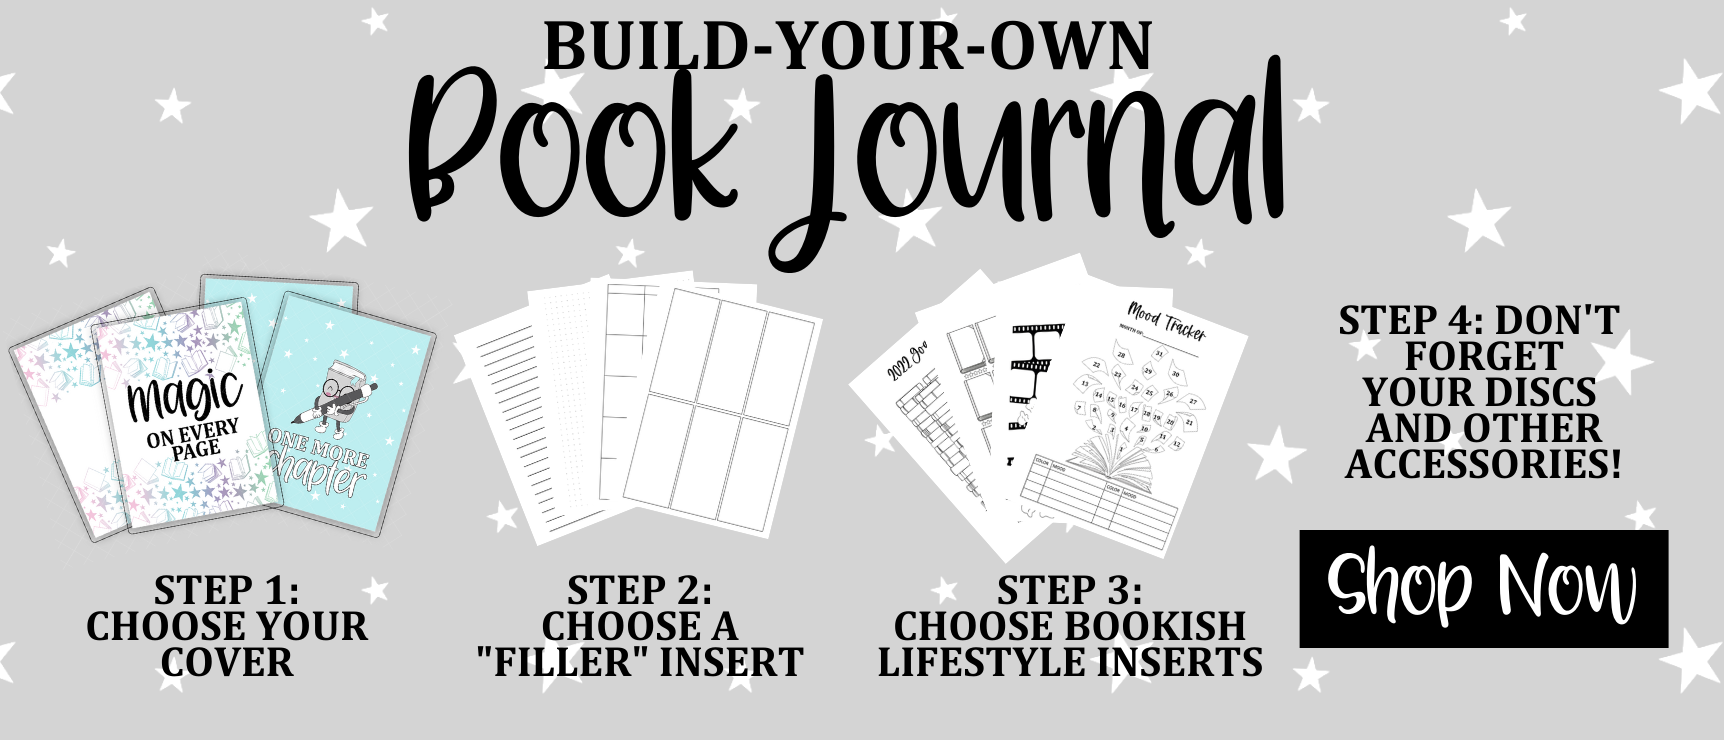 How to set up a reading journal